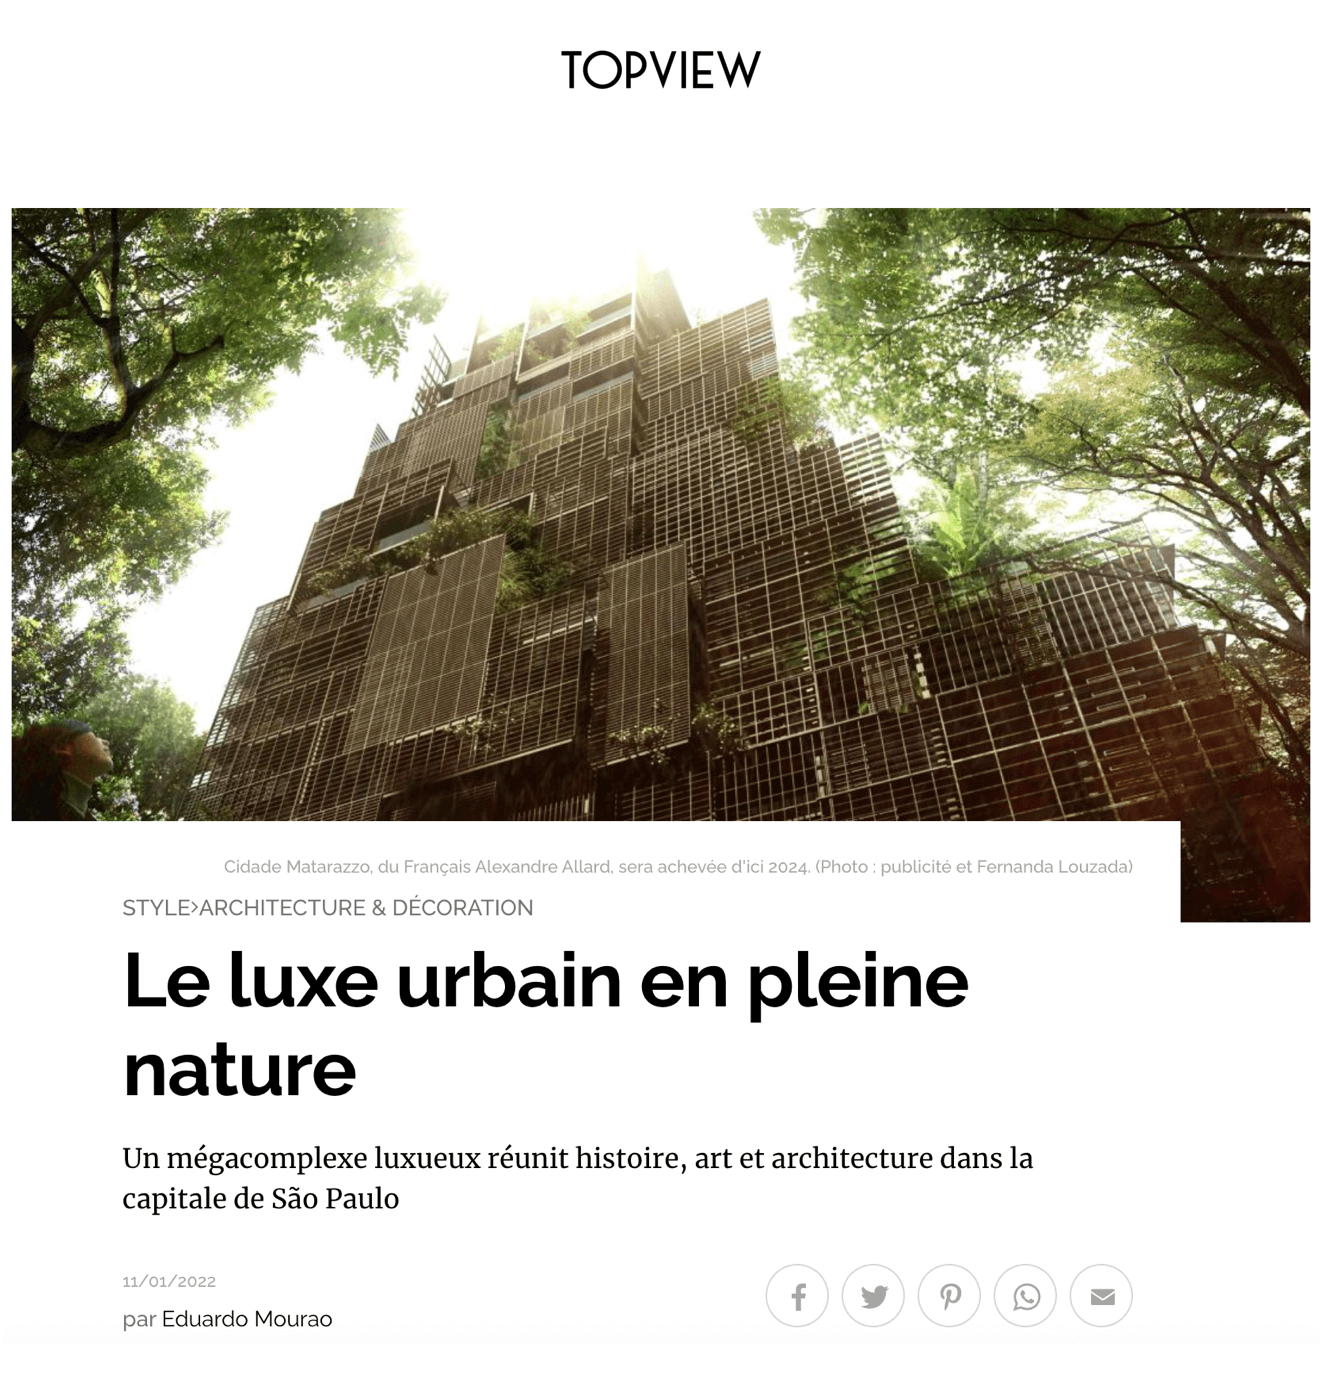 Urban luxury in the heart of nature